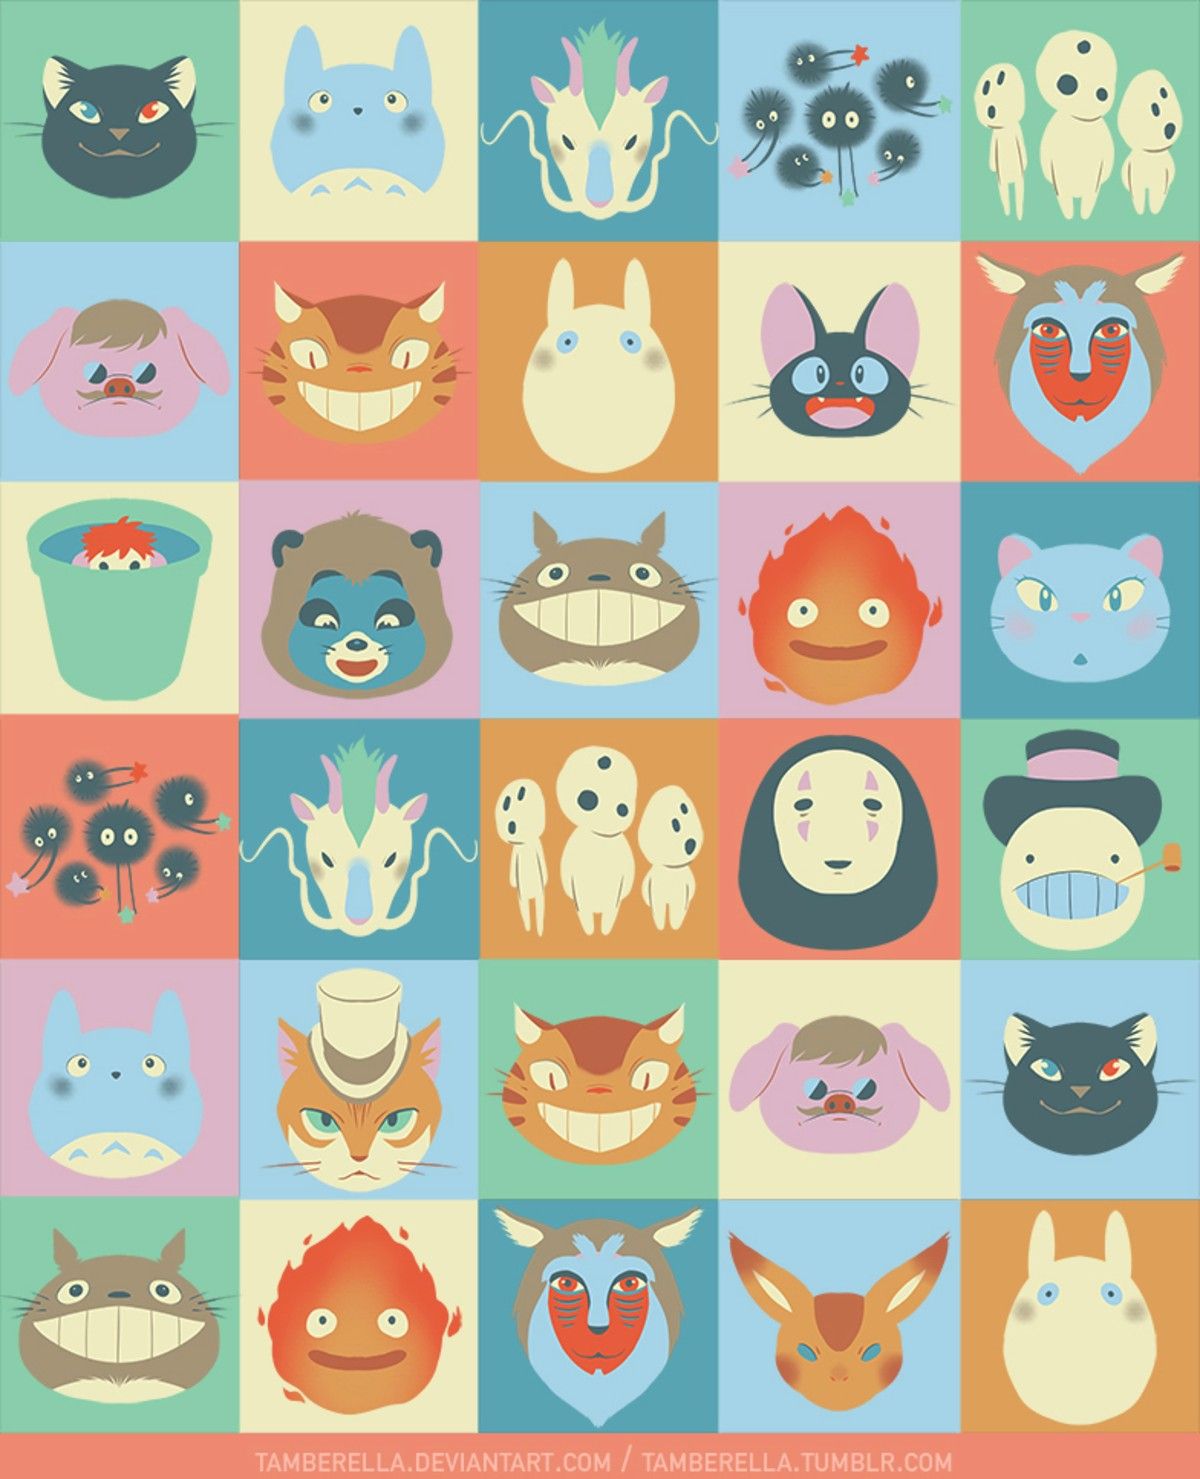 Studio Ghibili creatures arranged in a quilt pattern of fanart